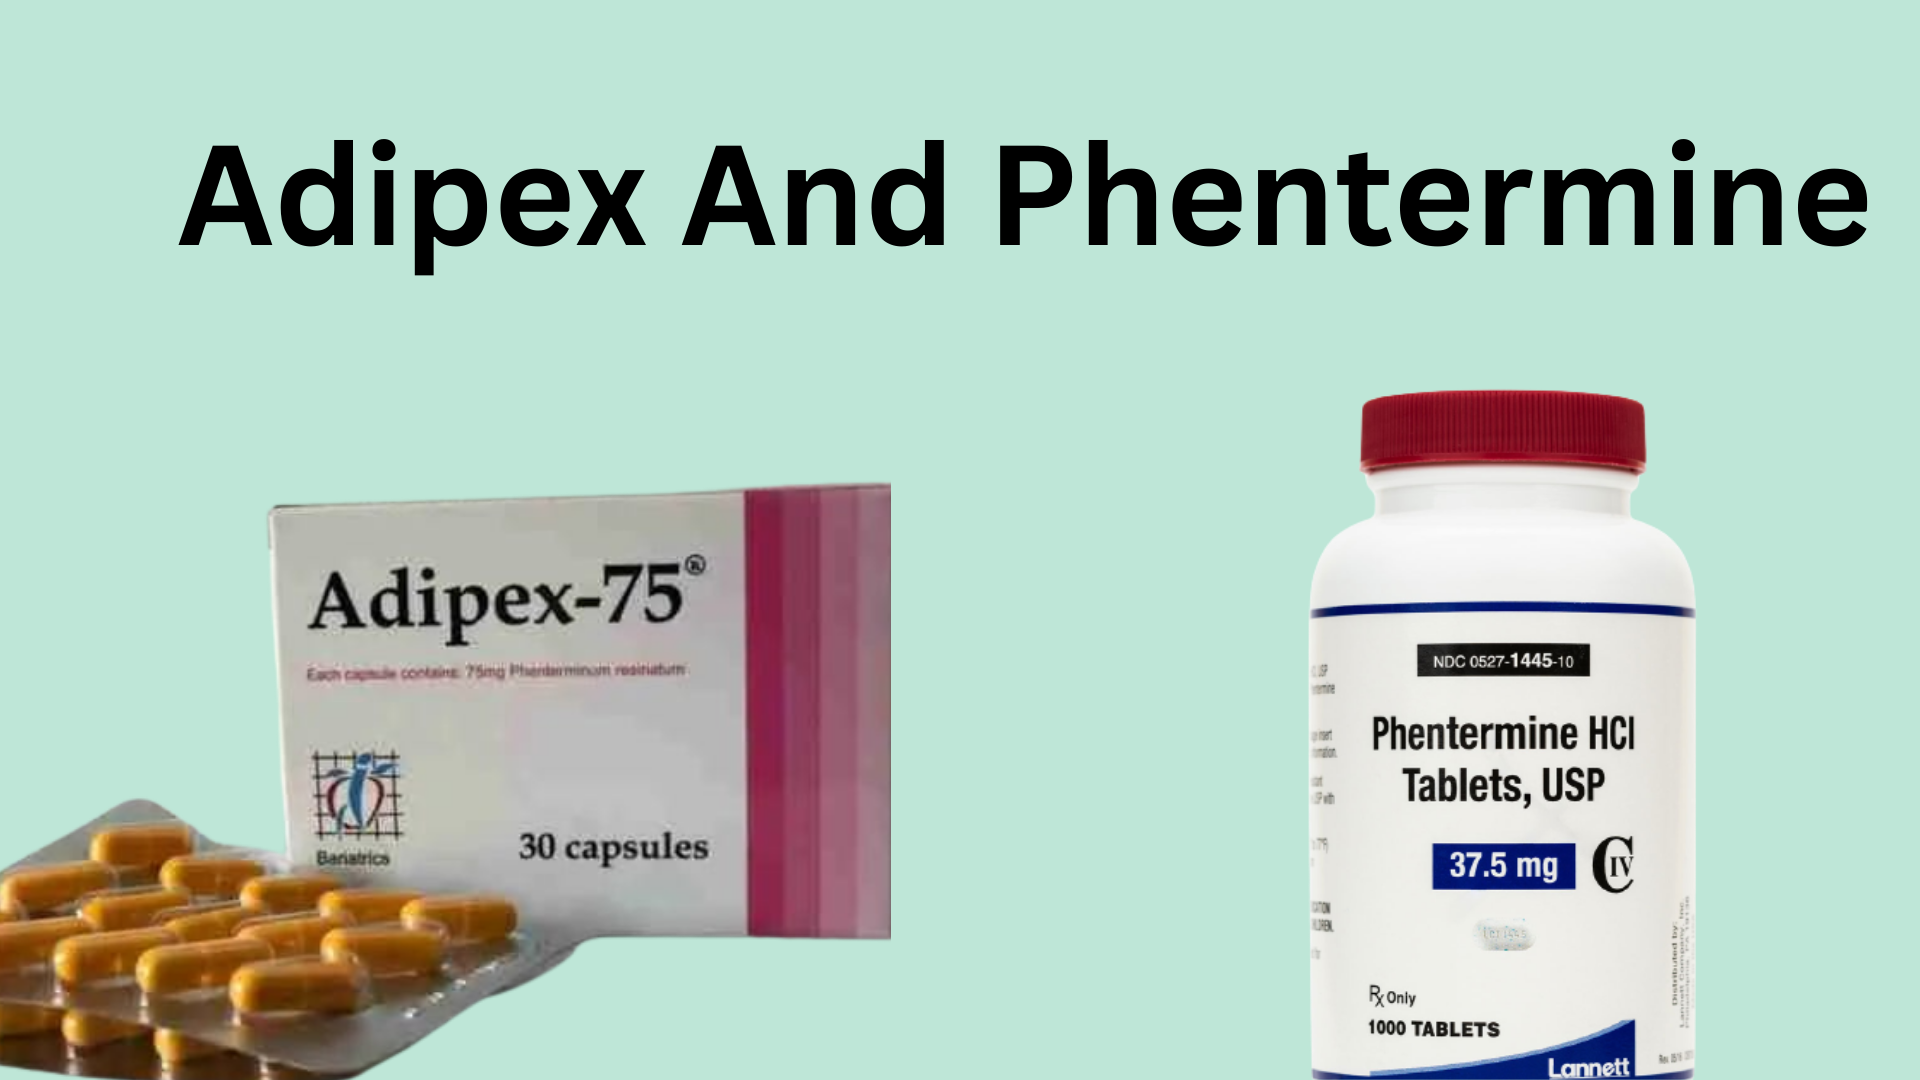 Adipex And Phentermine: How are they Different? 2